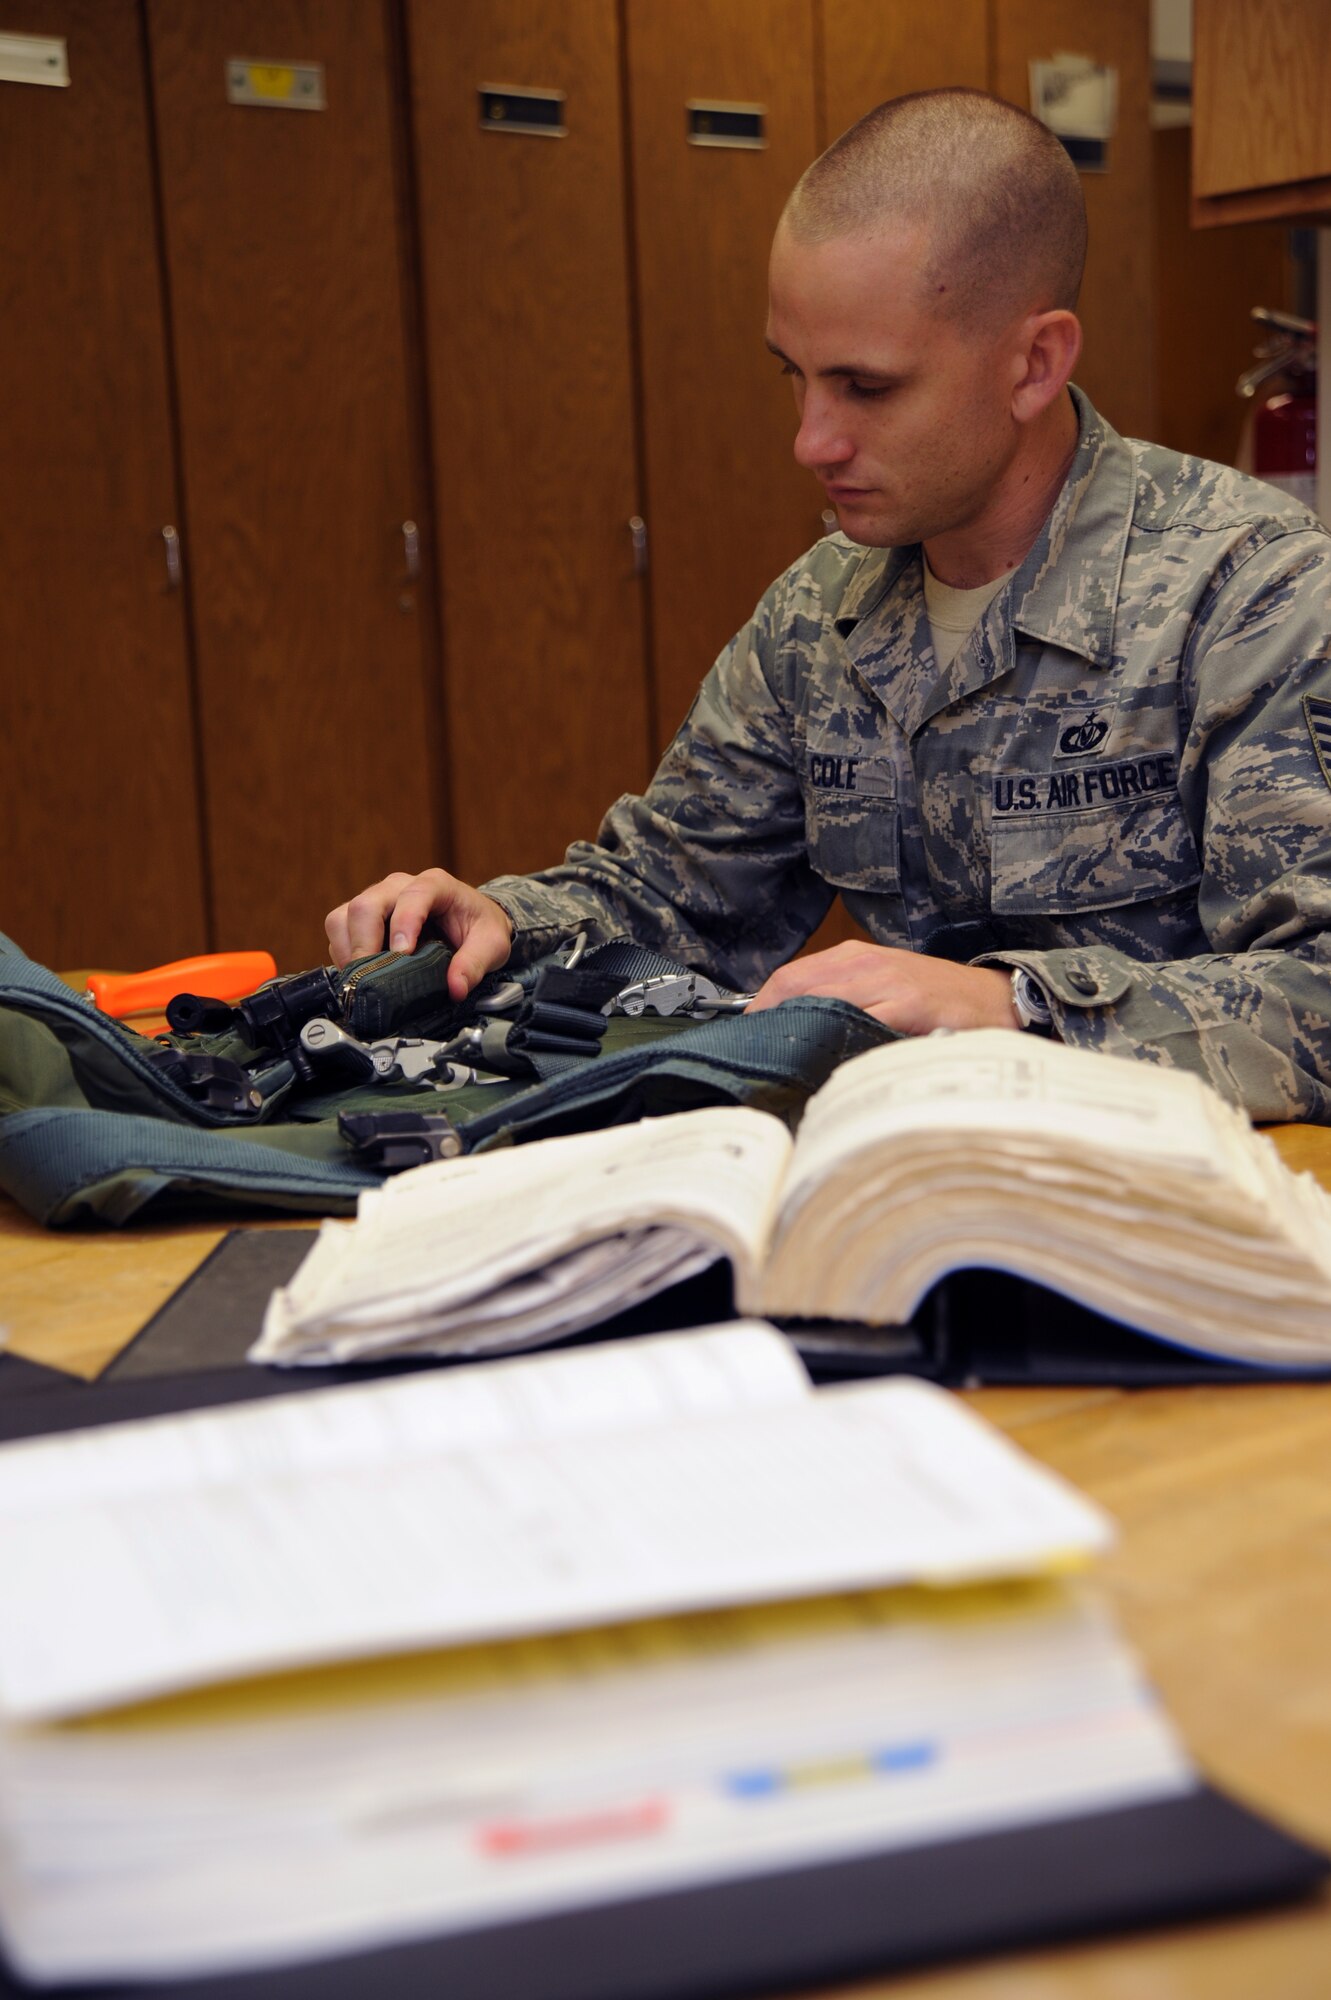 WHITEMAN AIR FORCE BASE, Mo., -- Tech. Sgt. Michael Cole, 393rd Aircrew Fight Equipment NCO in charge, uses his technical order to inspect the torso harness used in the B-2 ejection seat. The TO gives step-by-step procedures on inspecting safety equipment.
(U.S. Air Force photo/Staff Sgt. Jason Huddleston) (Released)

